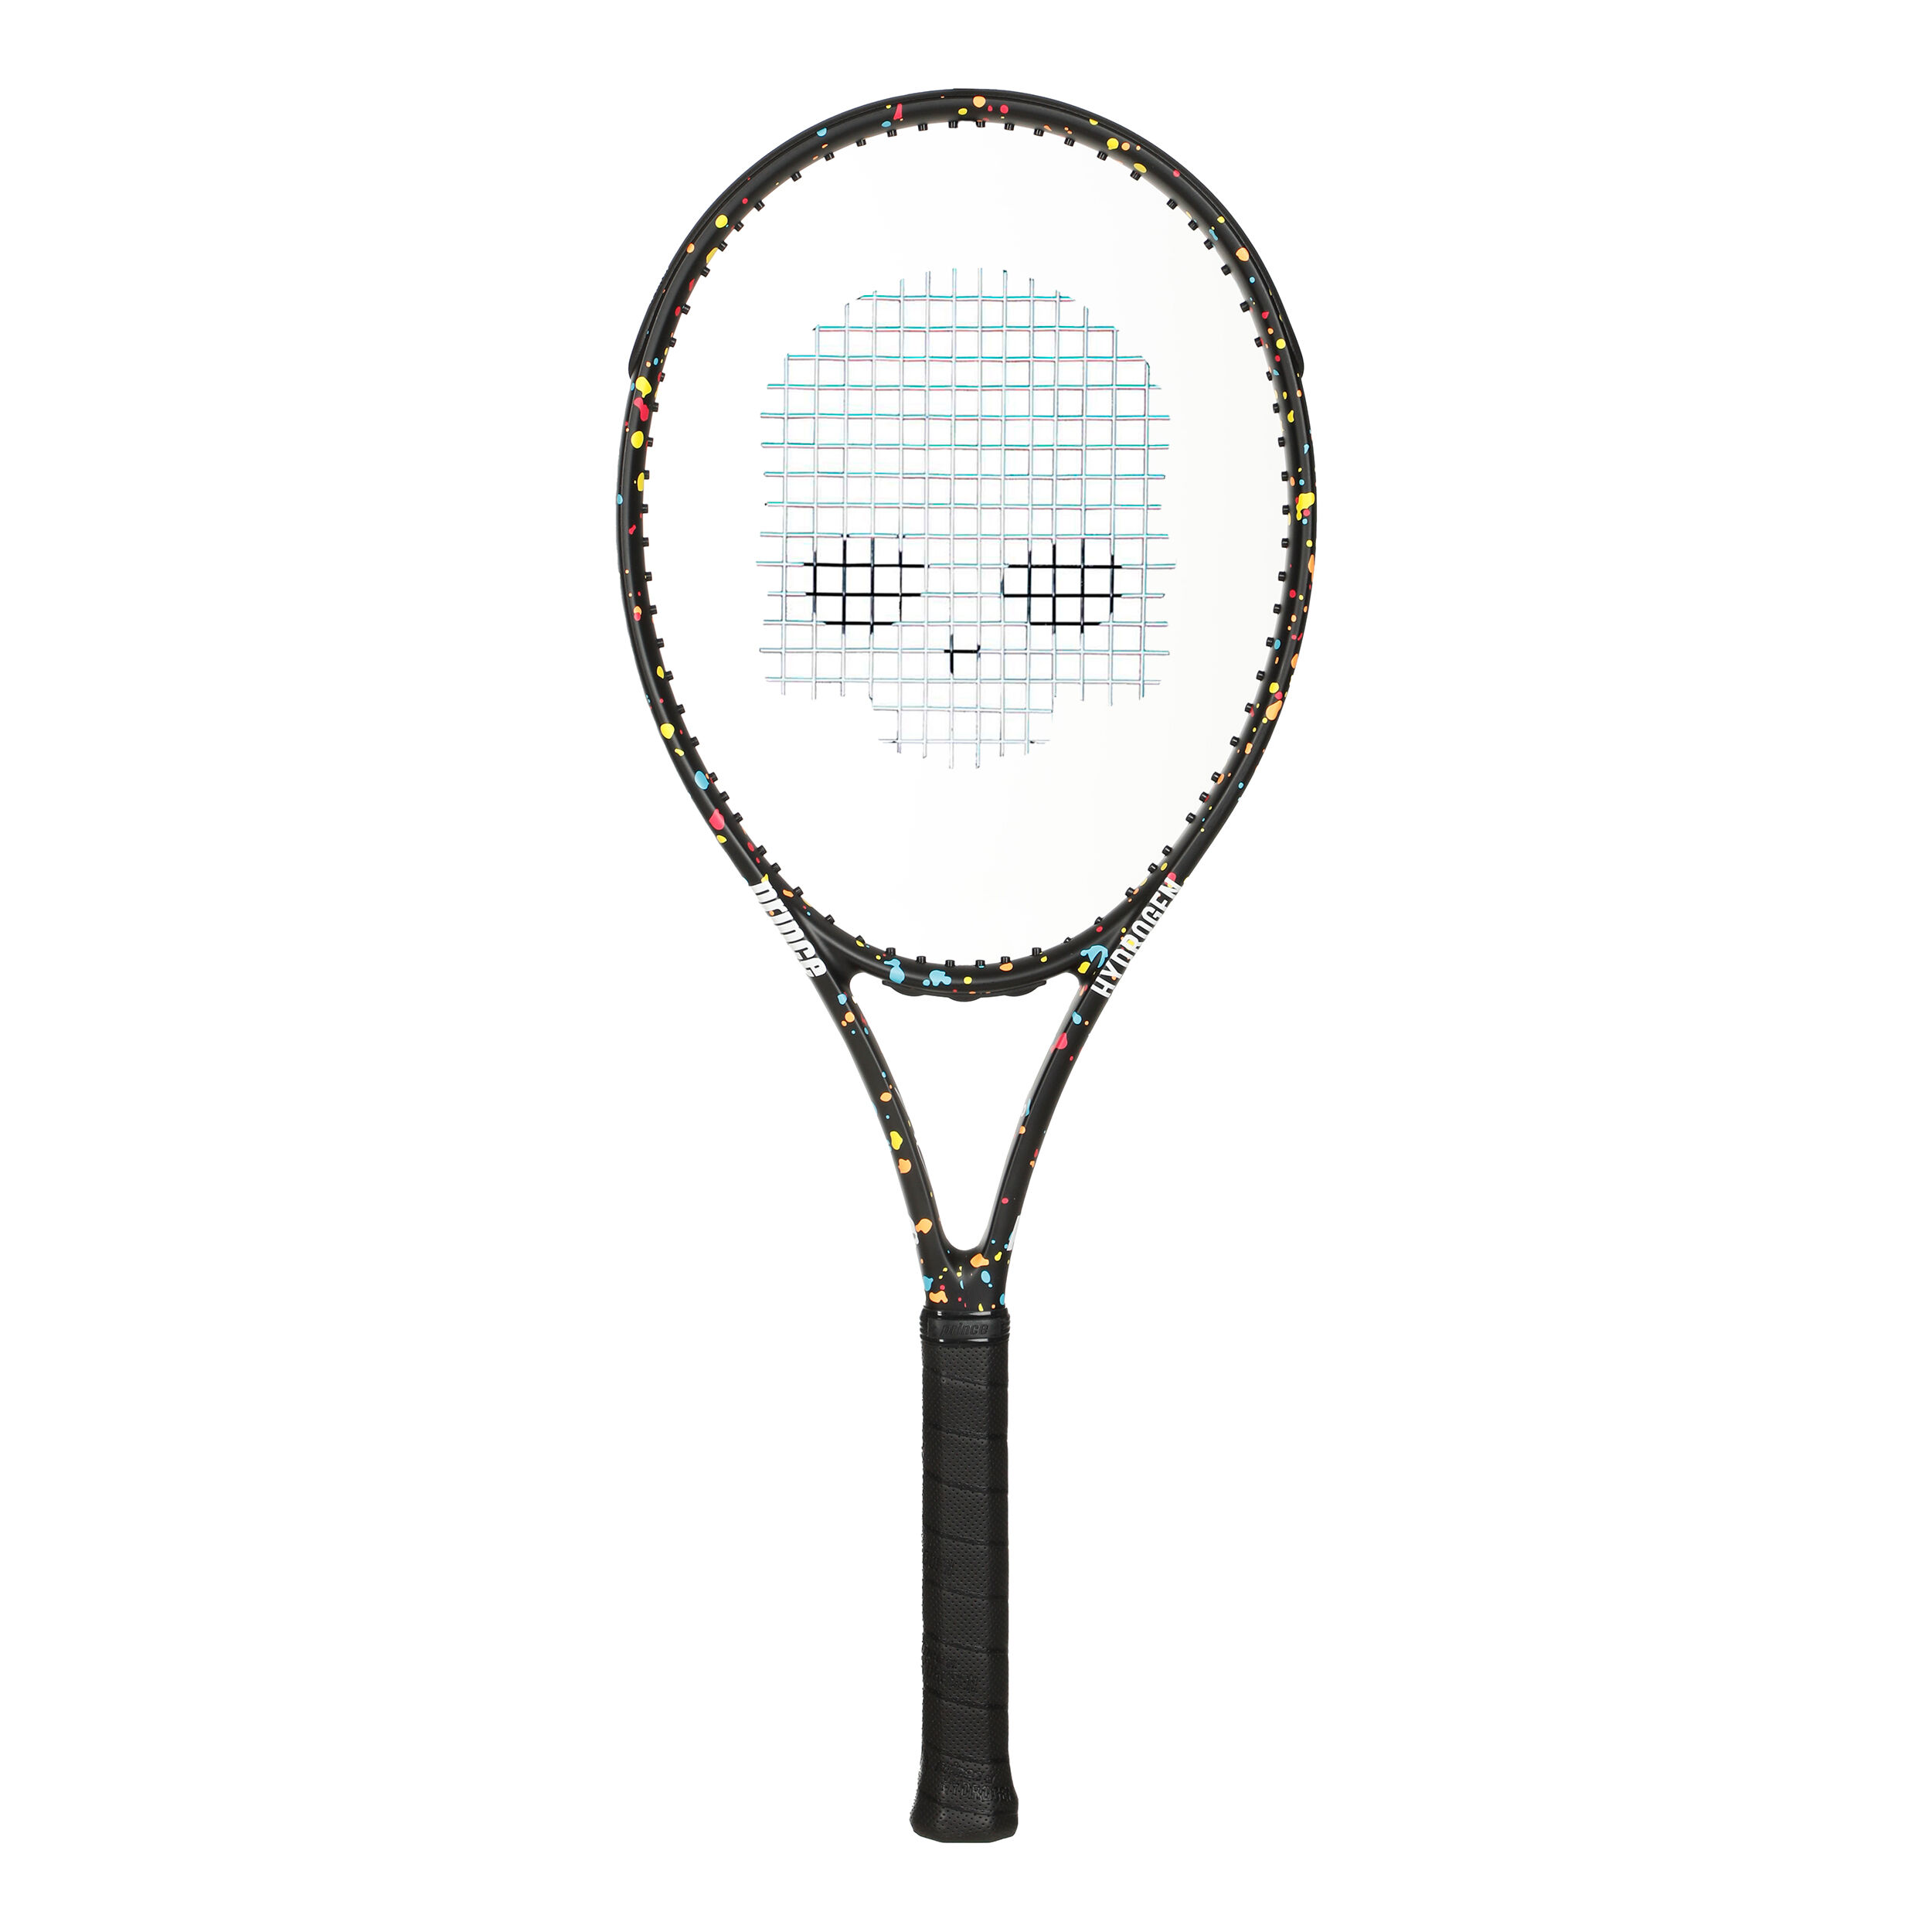 Buy Tour rackets from Prince online | Tennis-Point